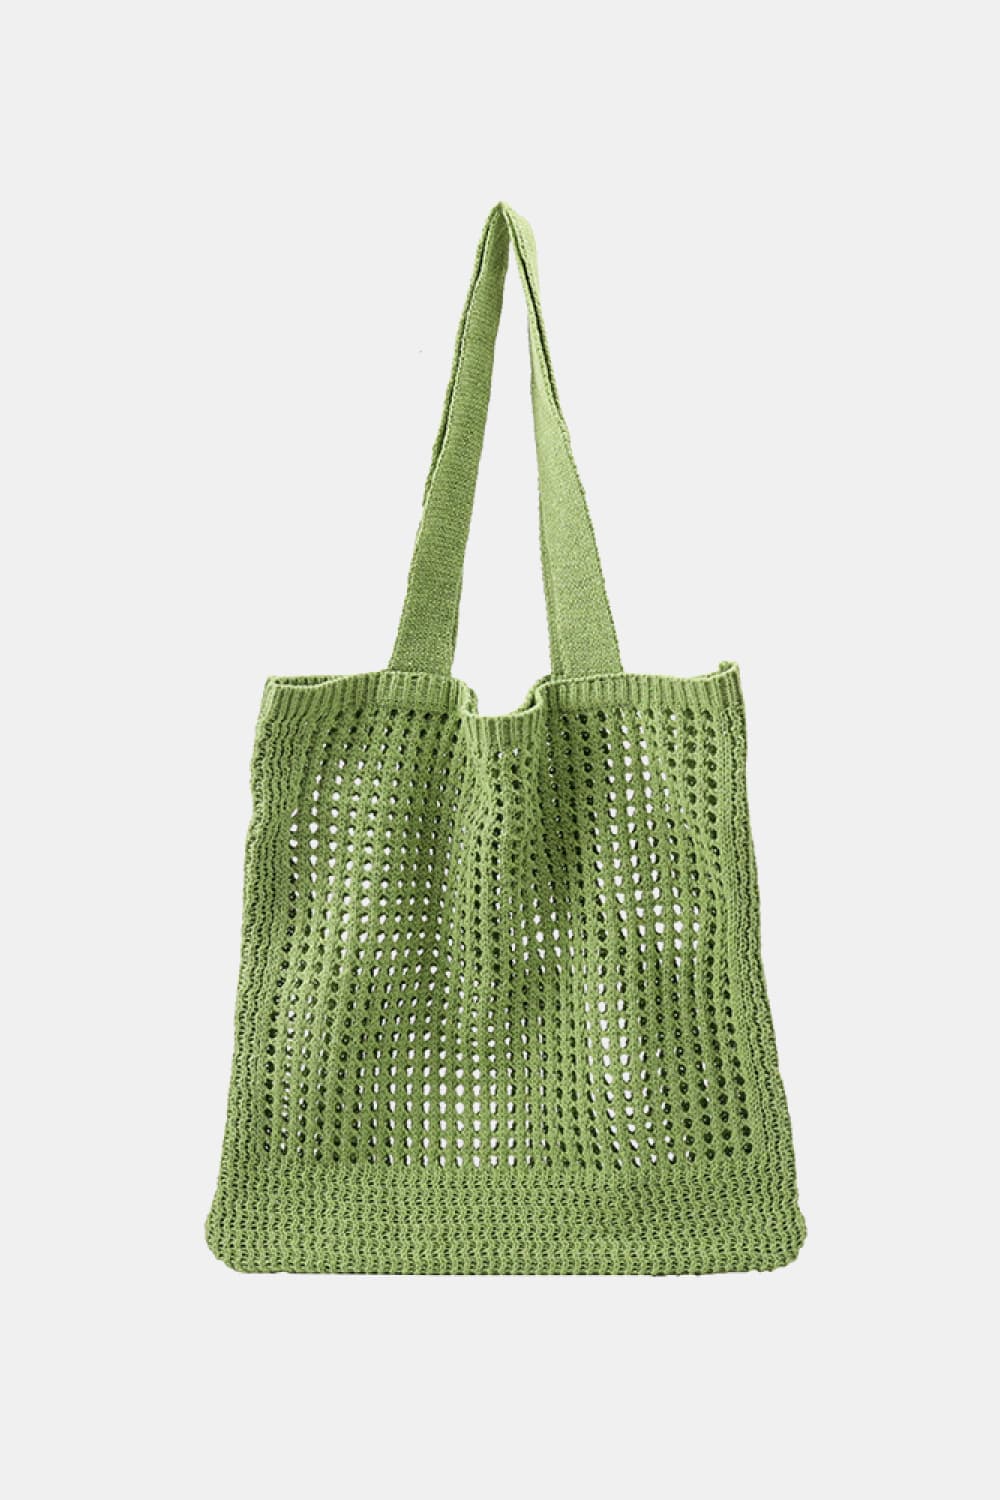 COUNTRY BEAUTY Openwork Tote Bag